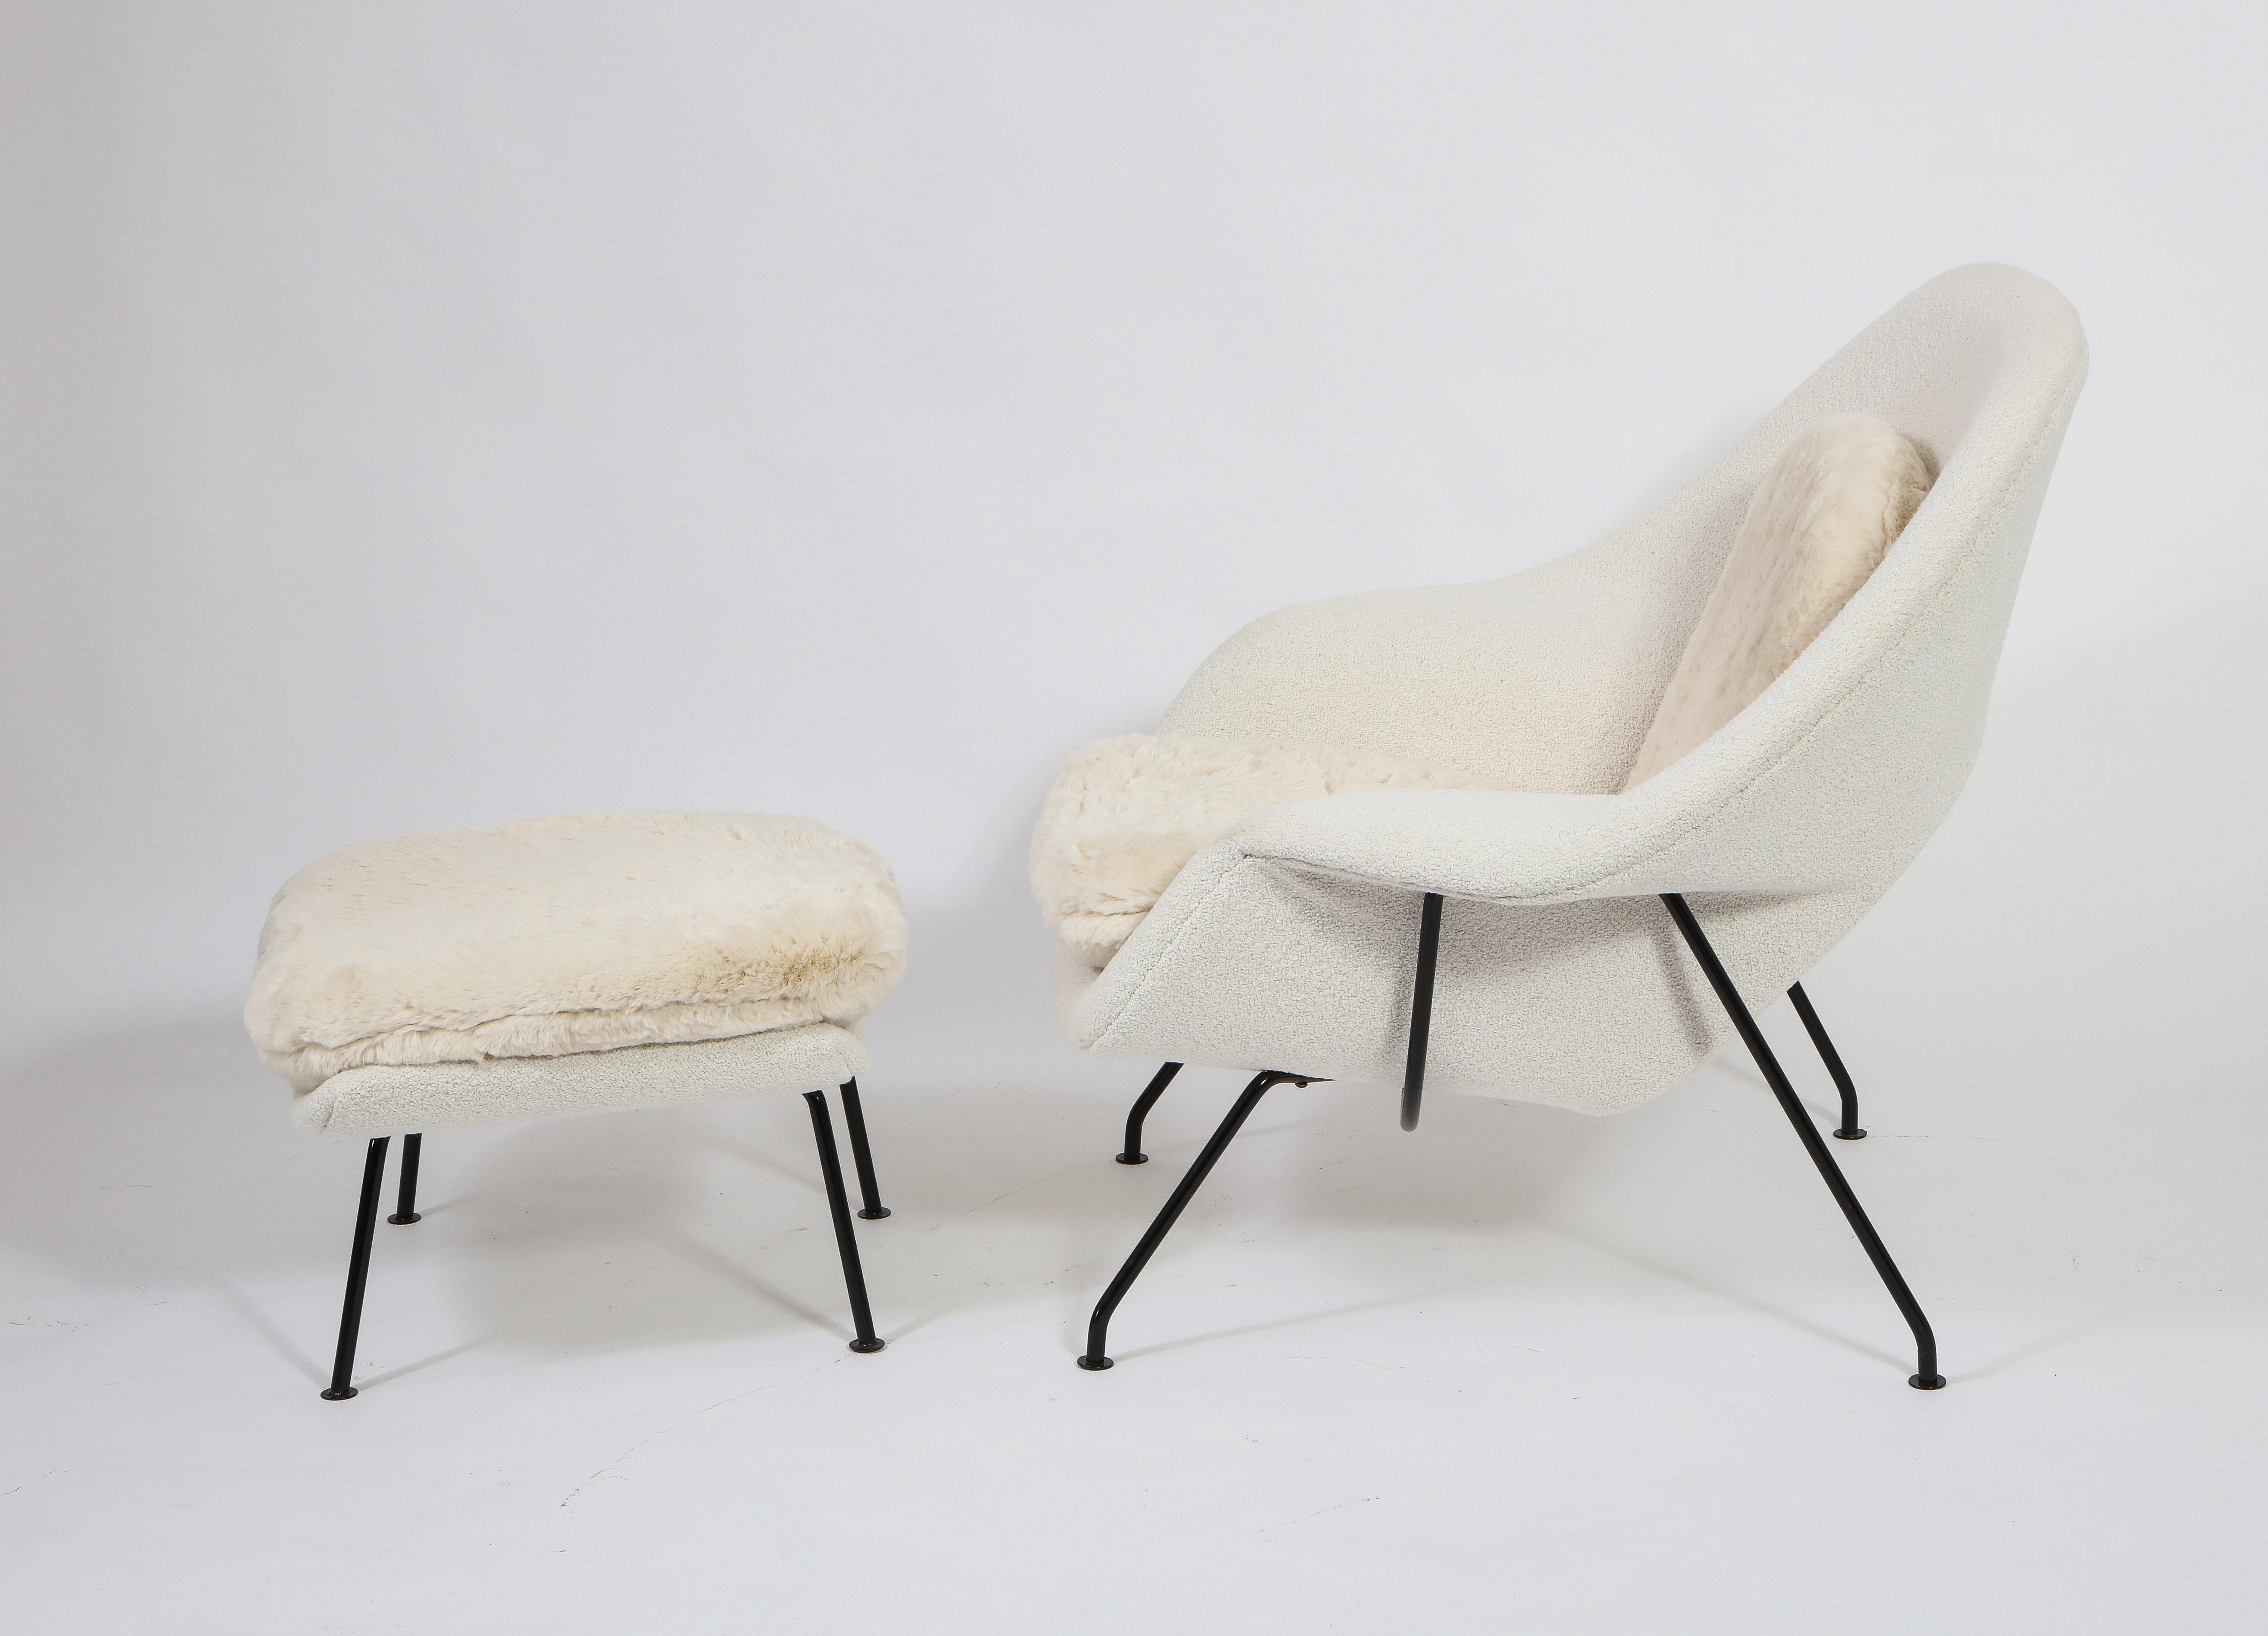 American Eero Saarinen for Knoll Pair of Two-Tone Womb Chairs with Ottomans, USA 1955 For Sale